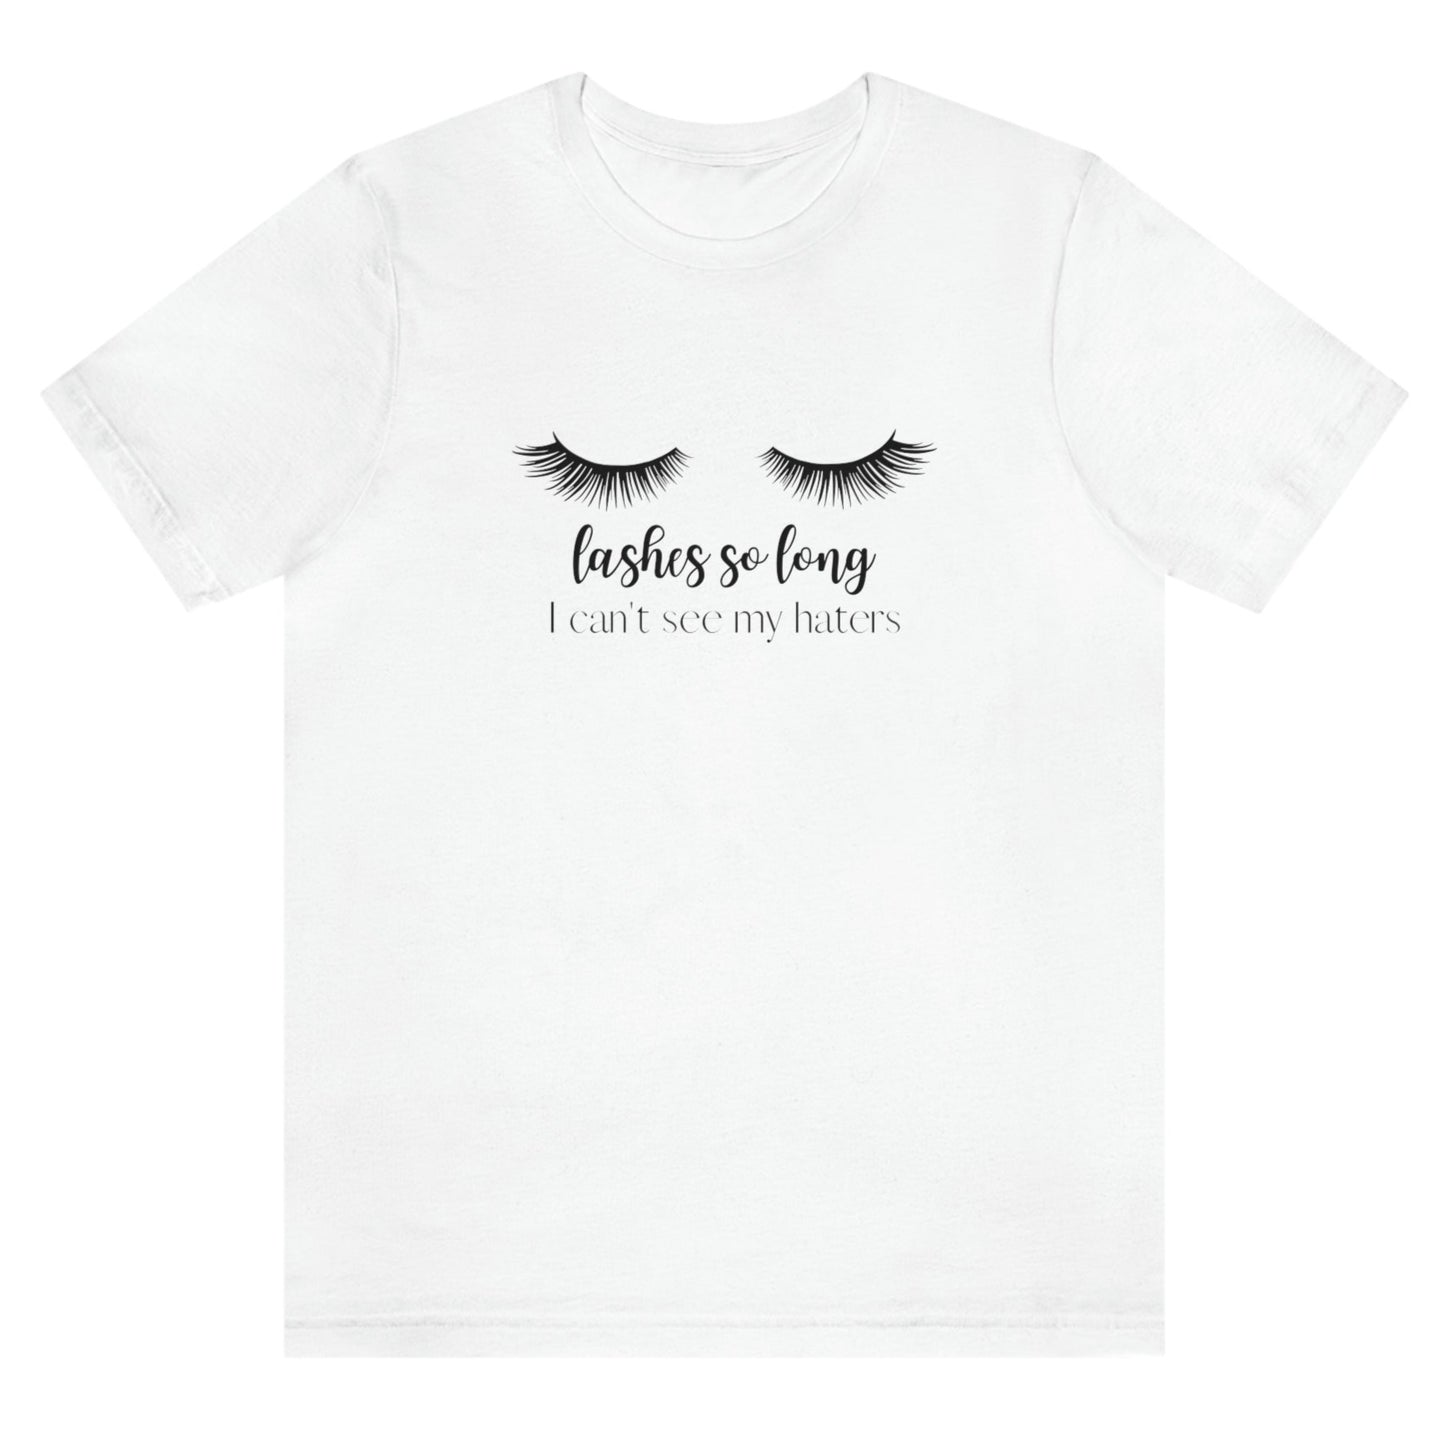 lashes-so-long-i-cant-see-my-haters-white-t-shirt-womens